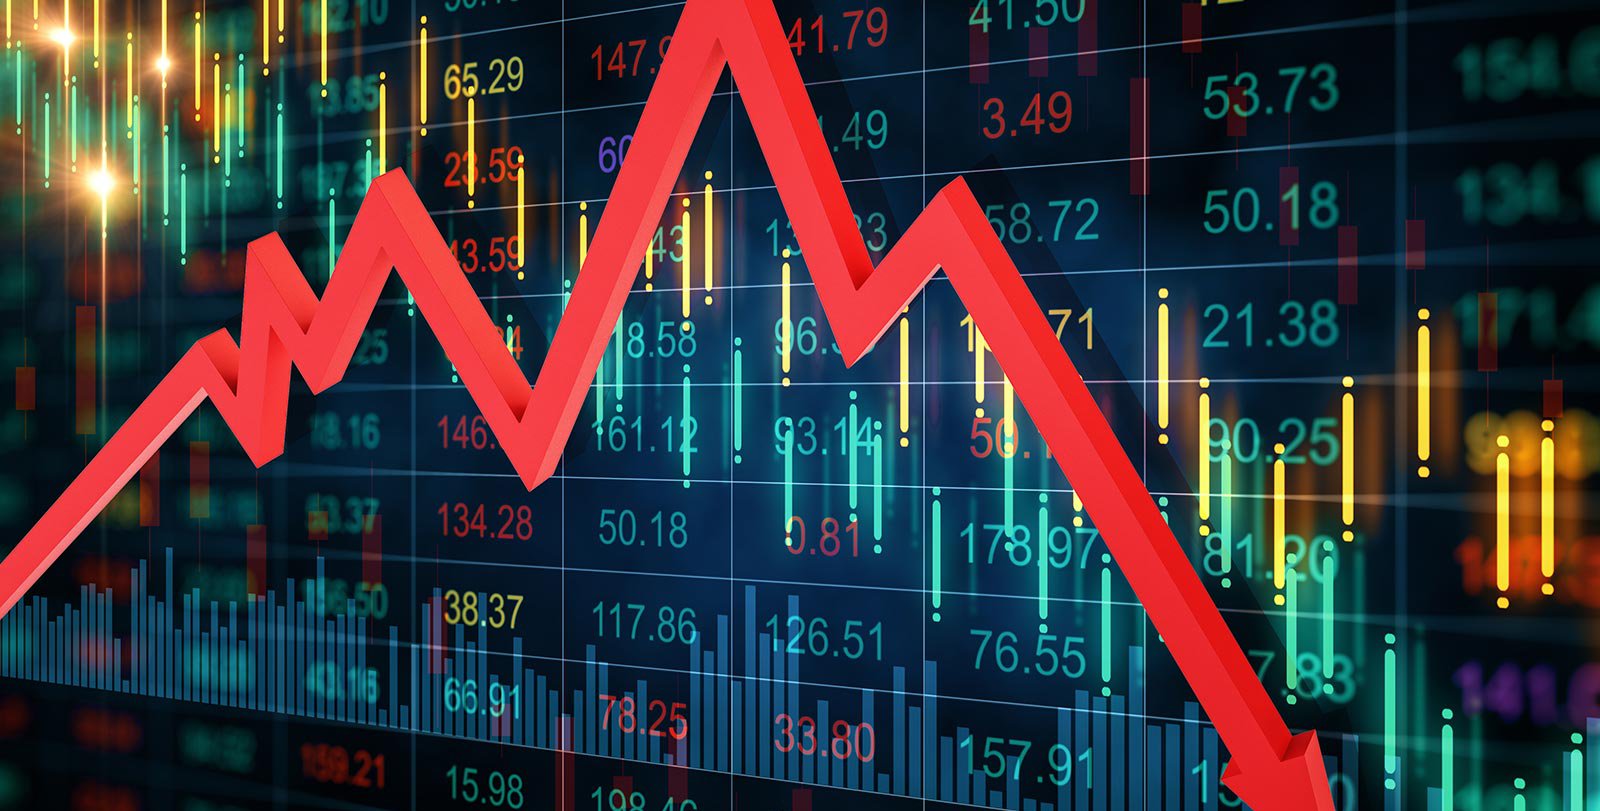 Investors are in panic due to a continuous decline in the stock market